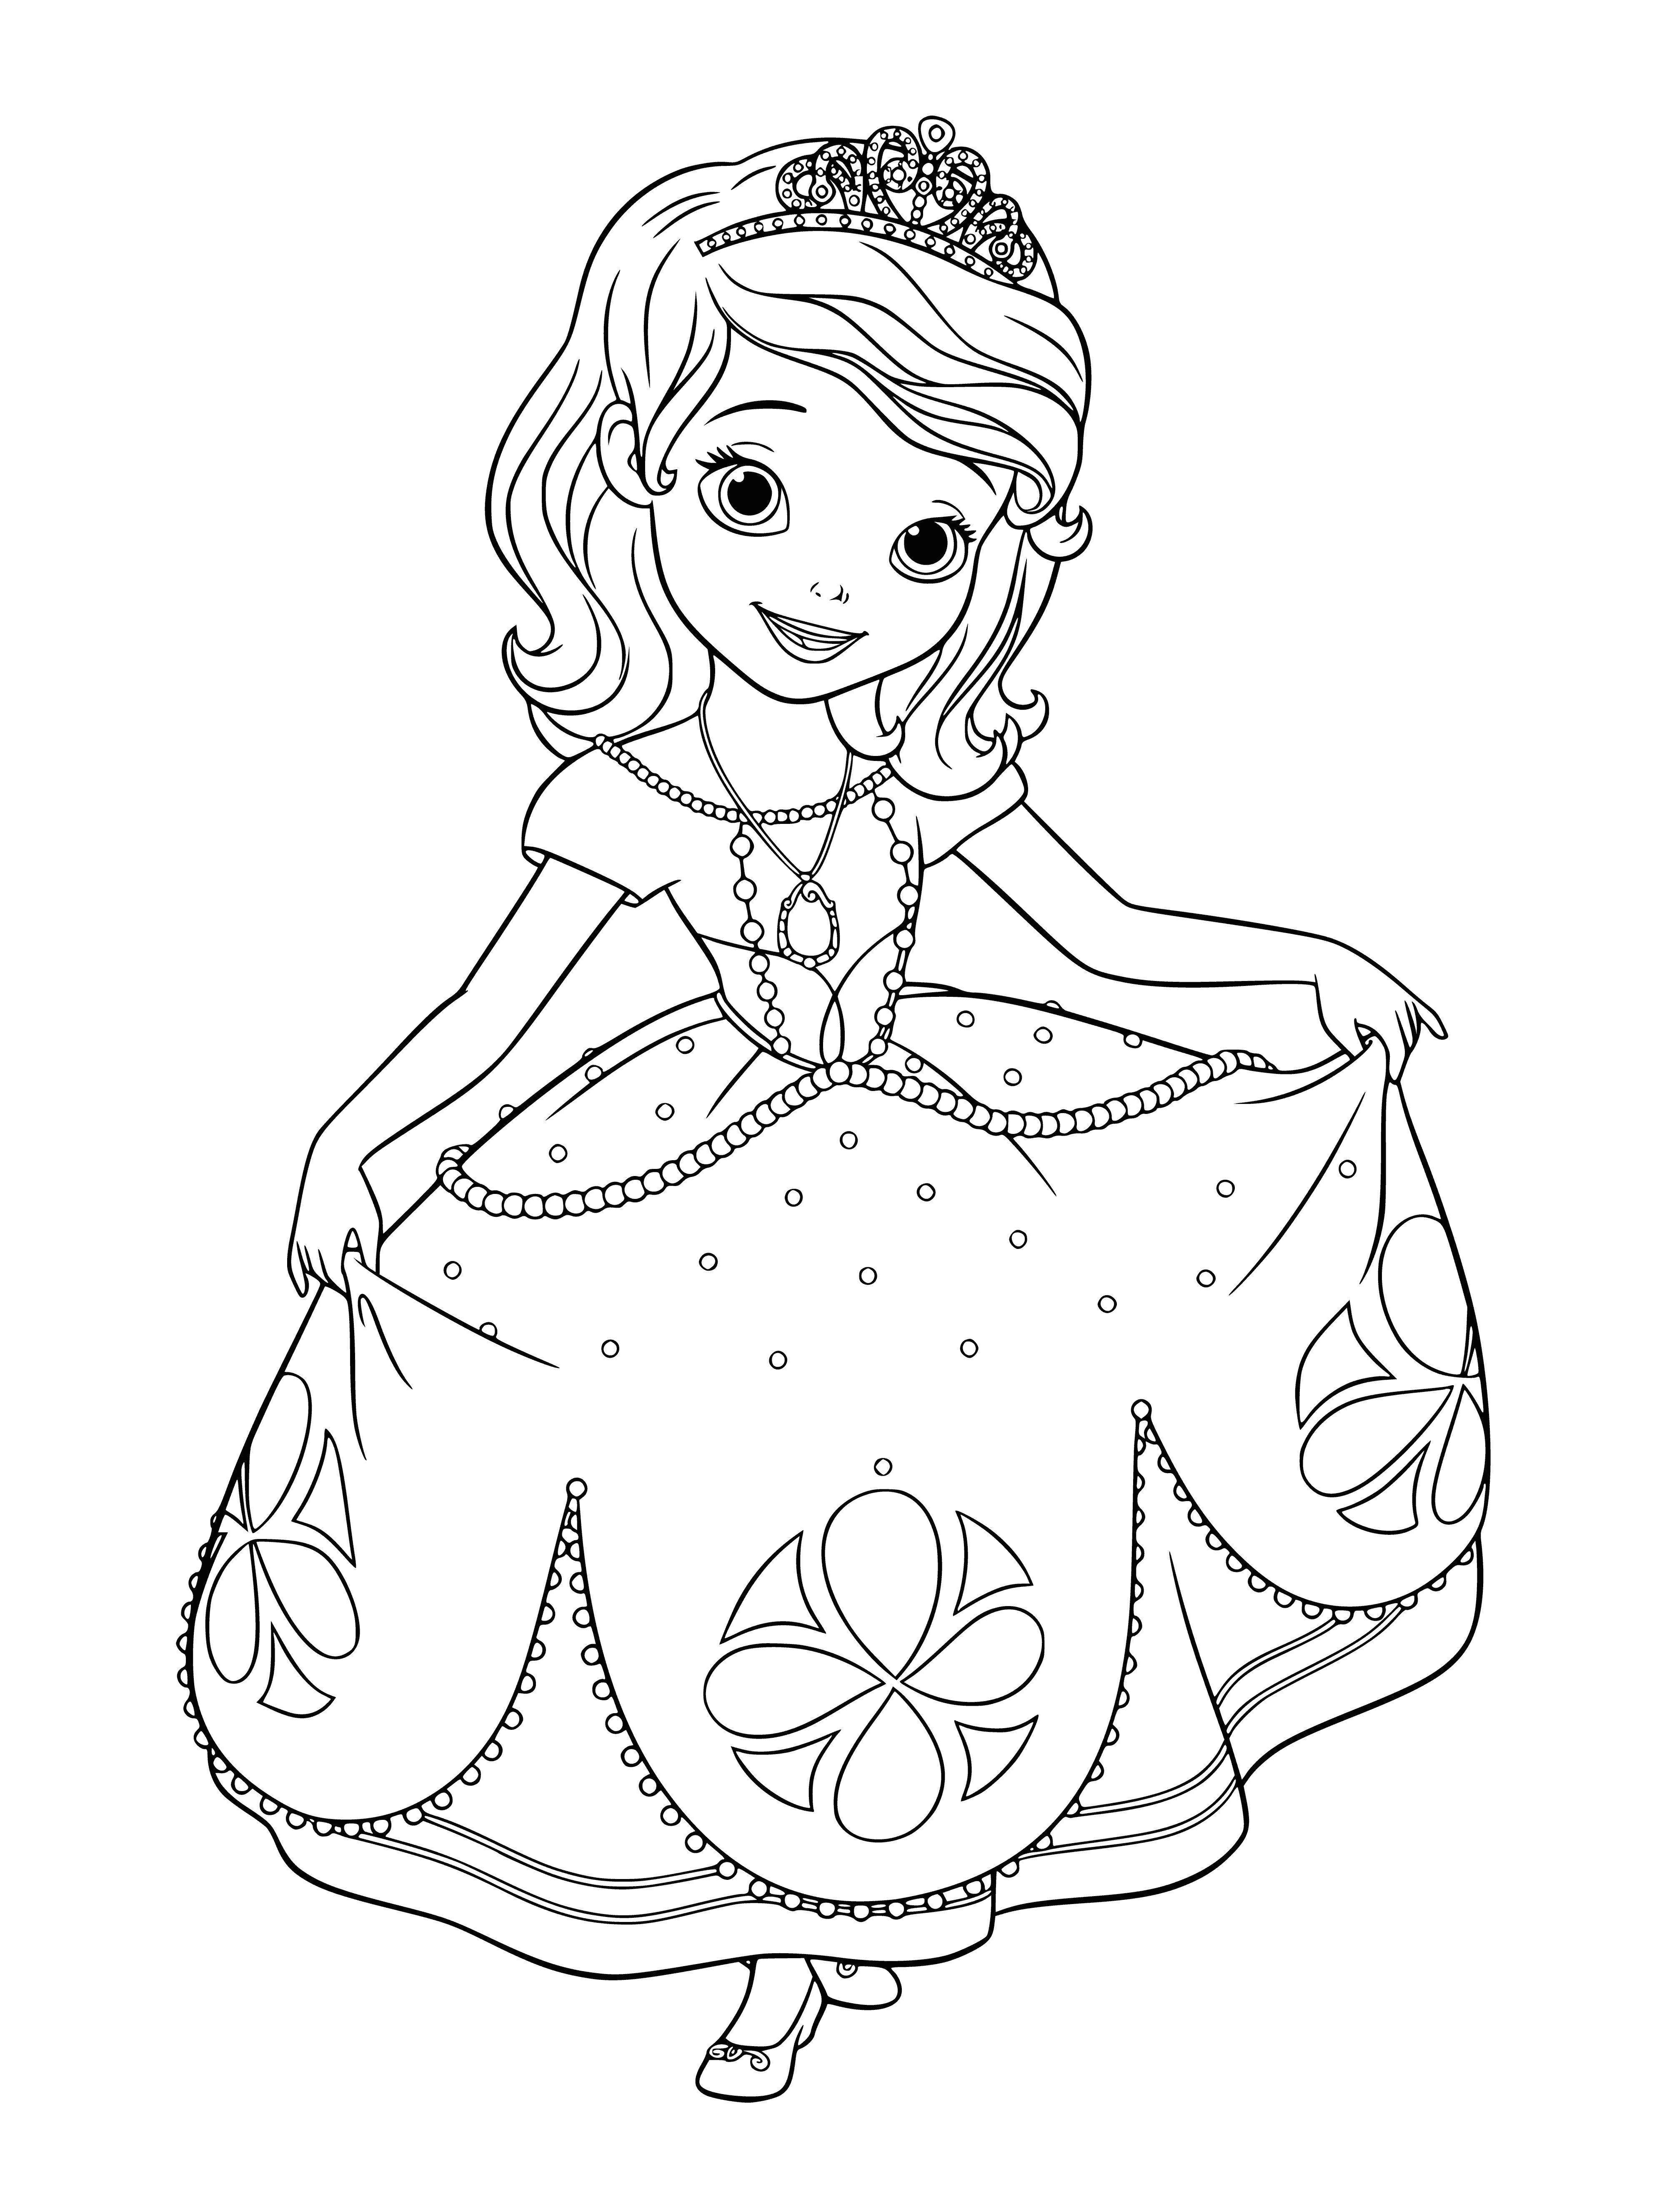 coloring page: Sofia sends a kiss wearing pink dress w/ gold tiara & blowing blonde hair in the wind.